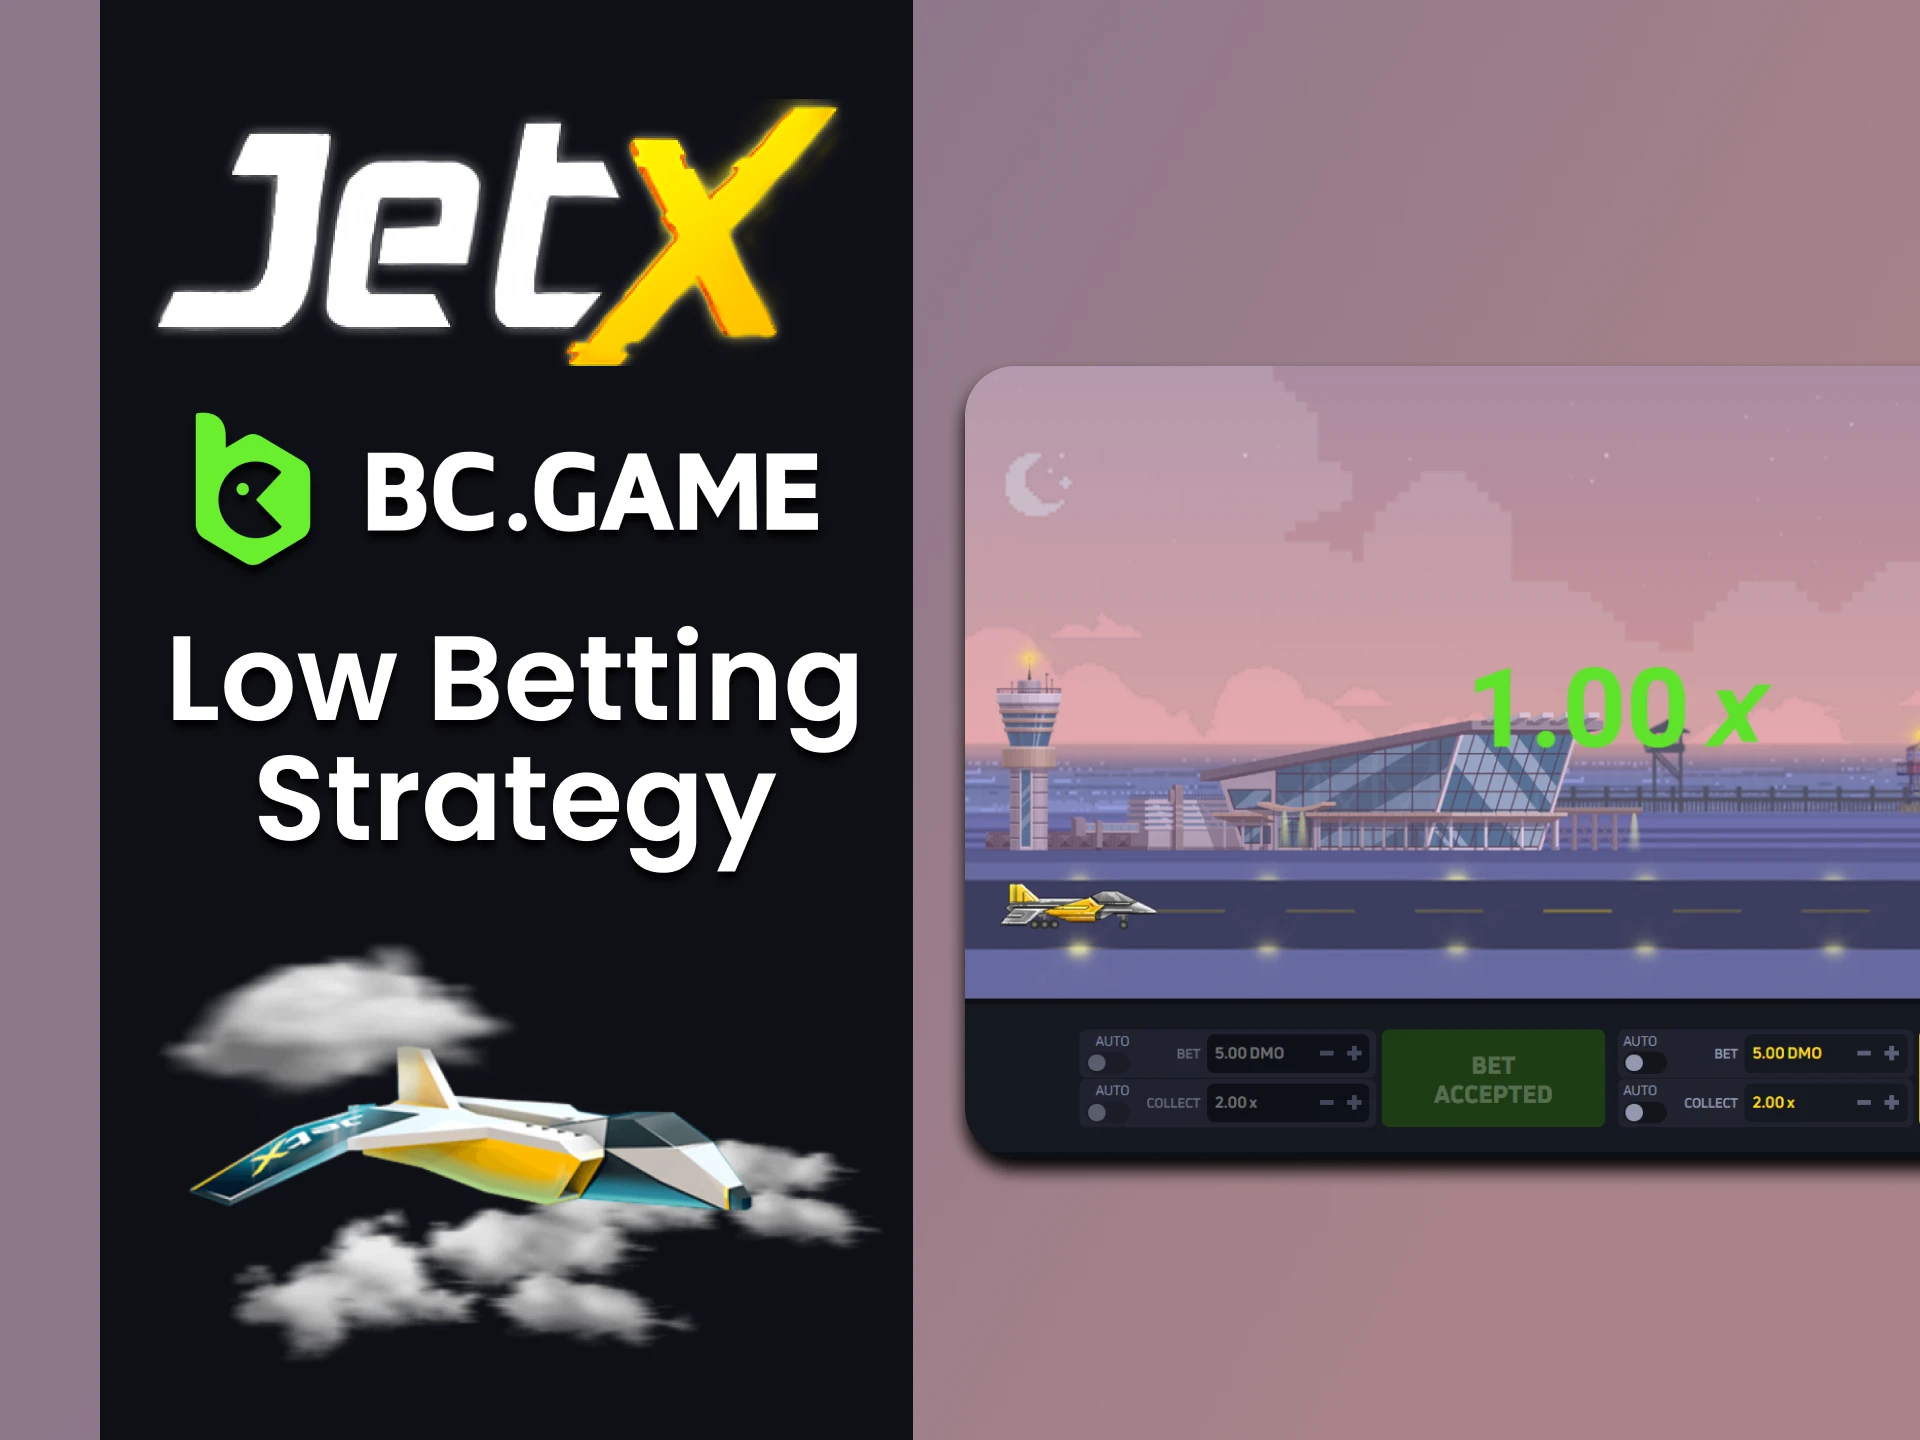 Play with a reduced bet strategy to avoid risks in JetX from BC Game.